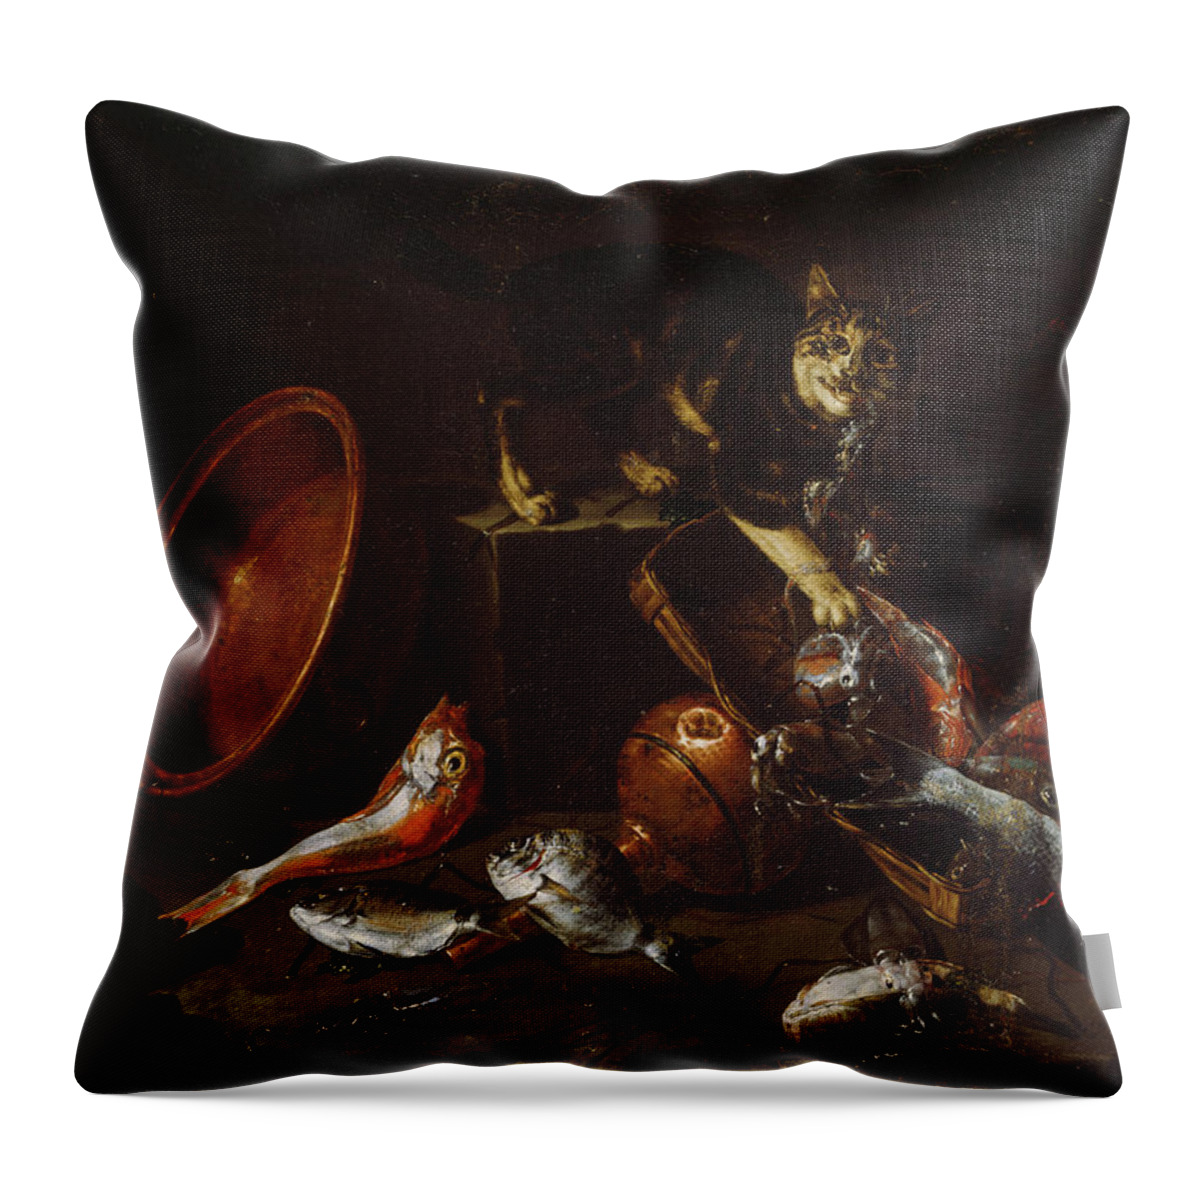 A Cat Stealing Fish Throw Pillow featuring the painting A Cat Stealing Fish by MotionAge Designs